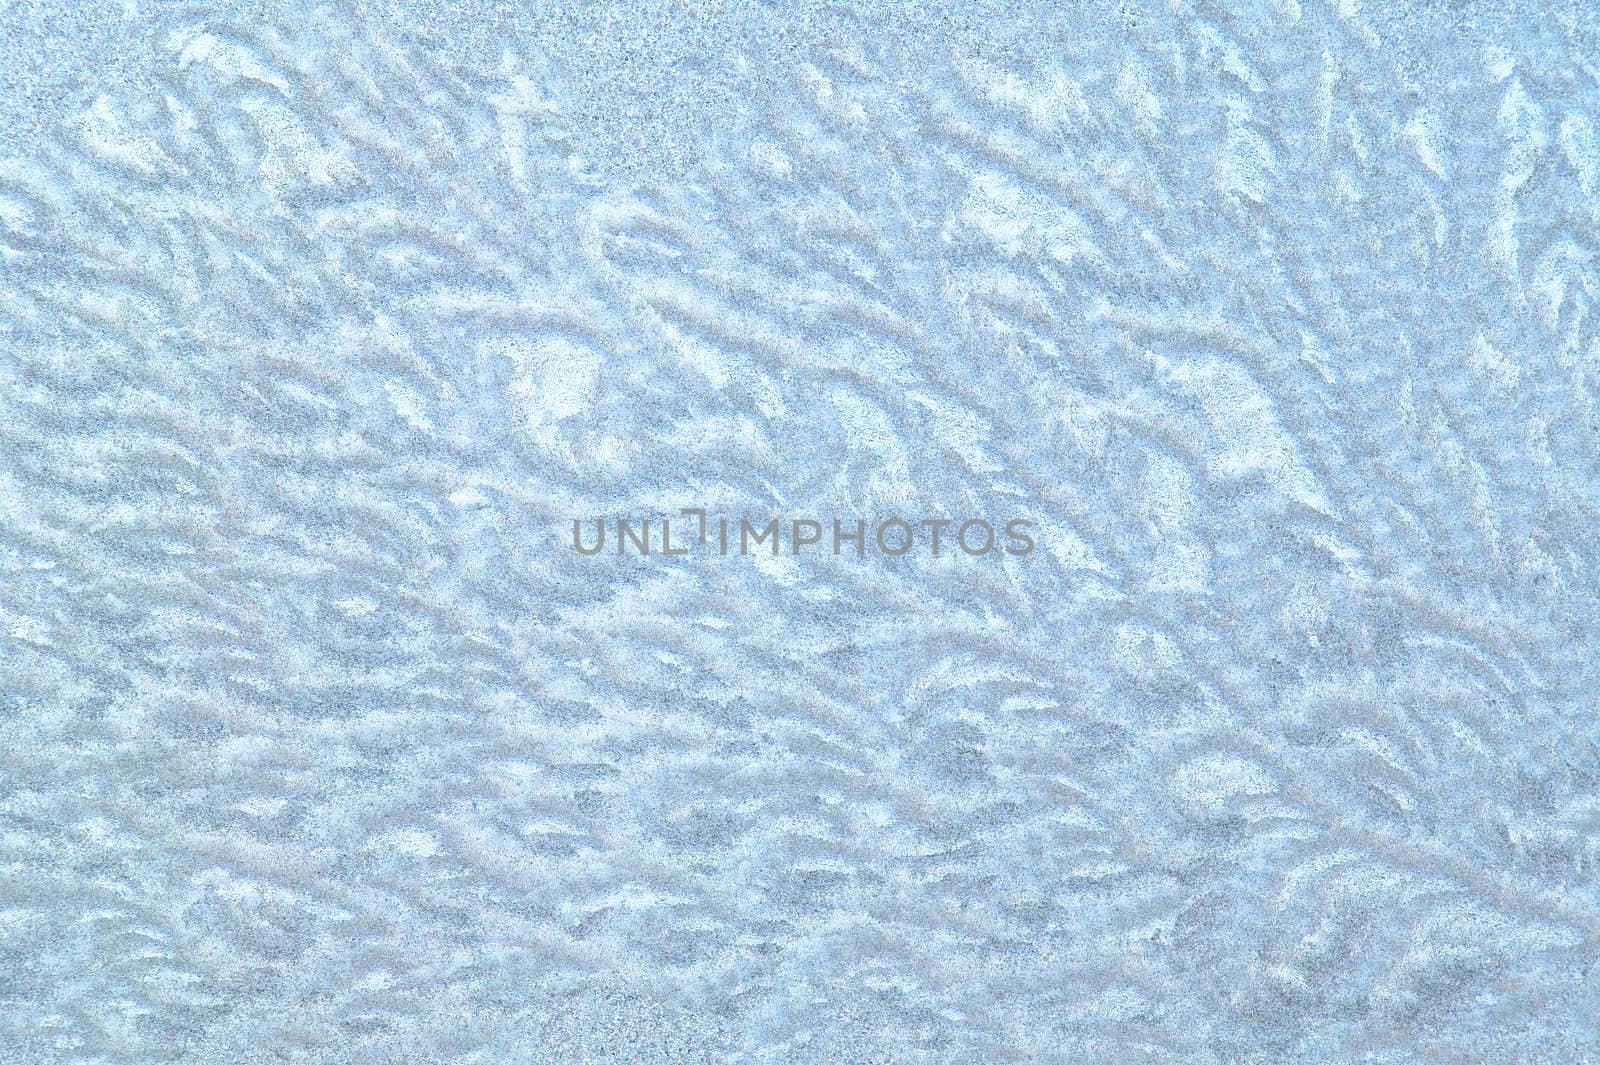 Background of ice patterns on a frosen window by ecobo